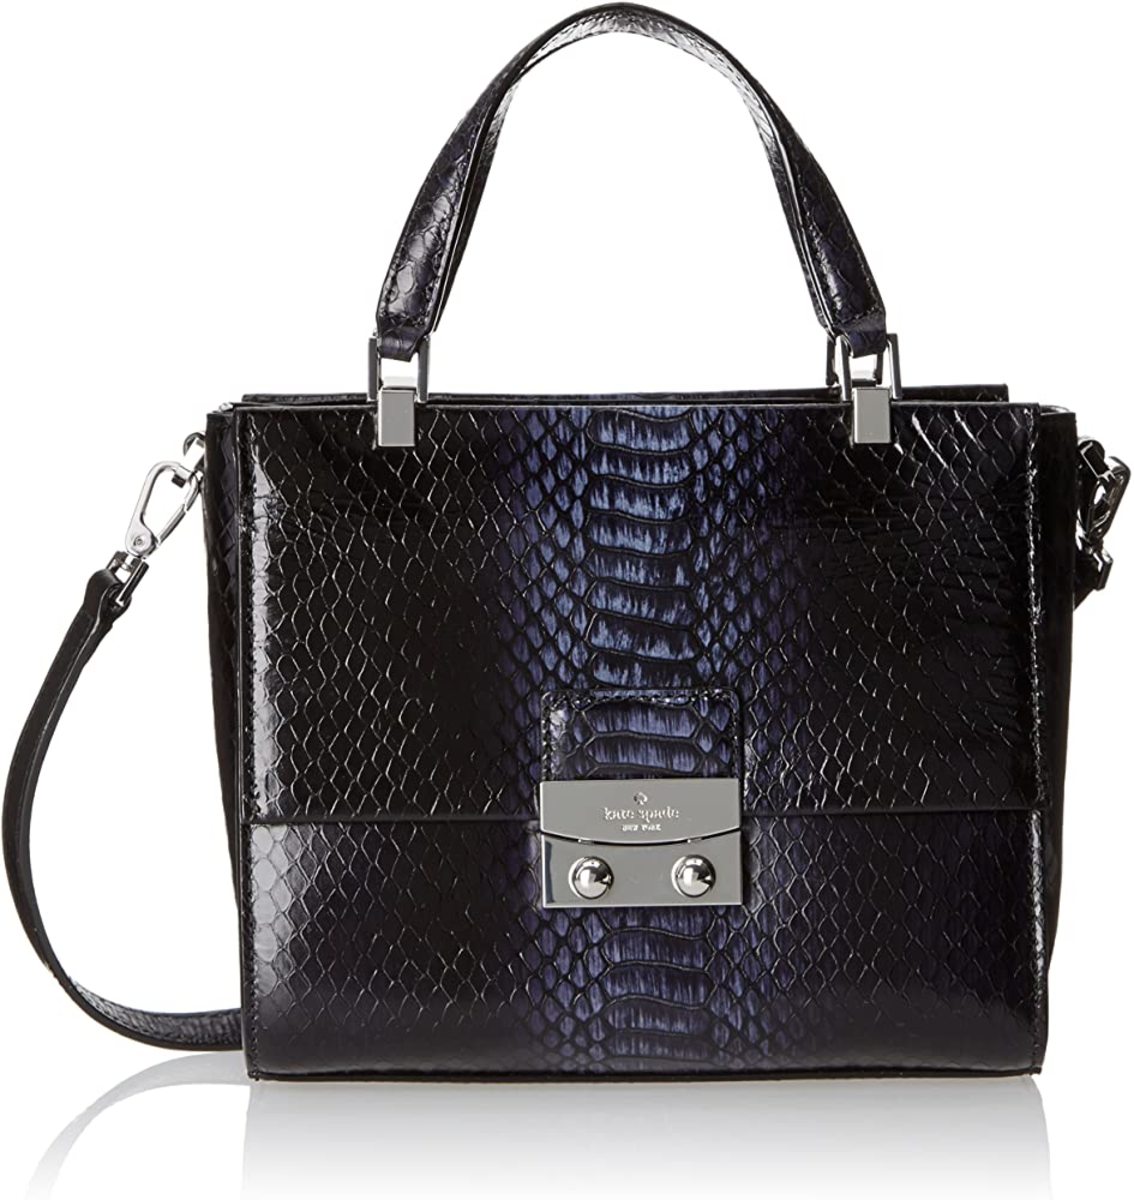 15 Most Adorable and Ergonomic Handbags for Women